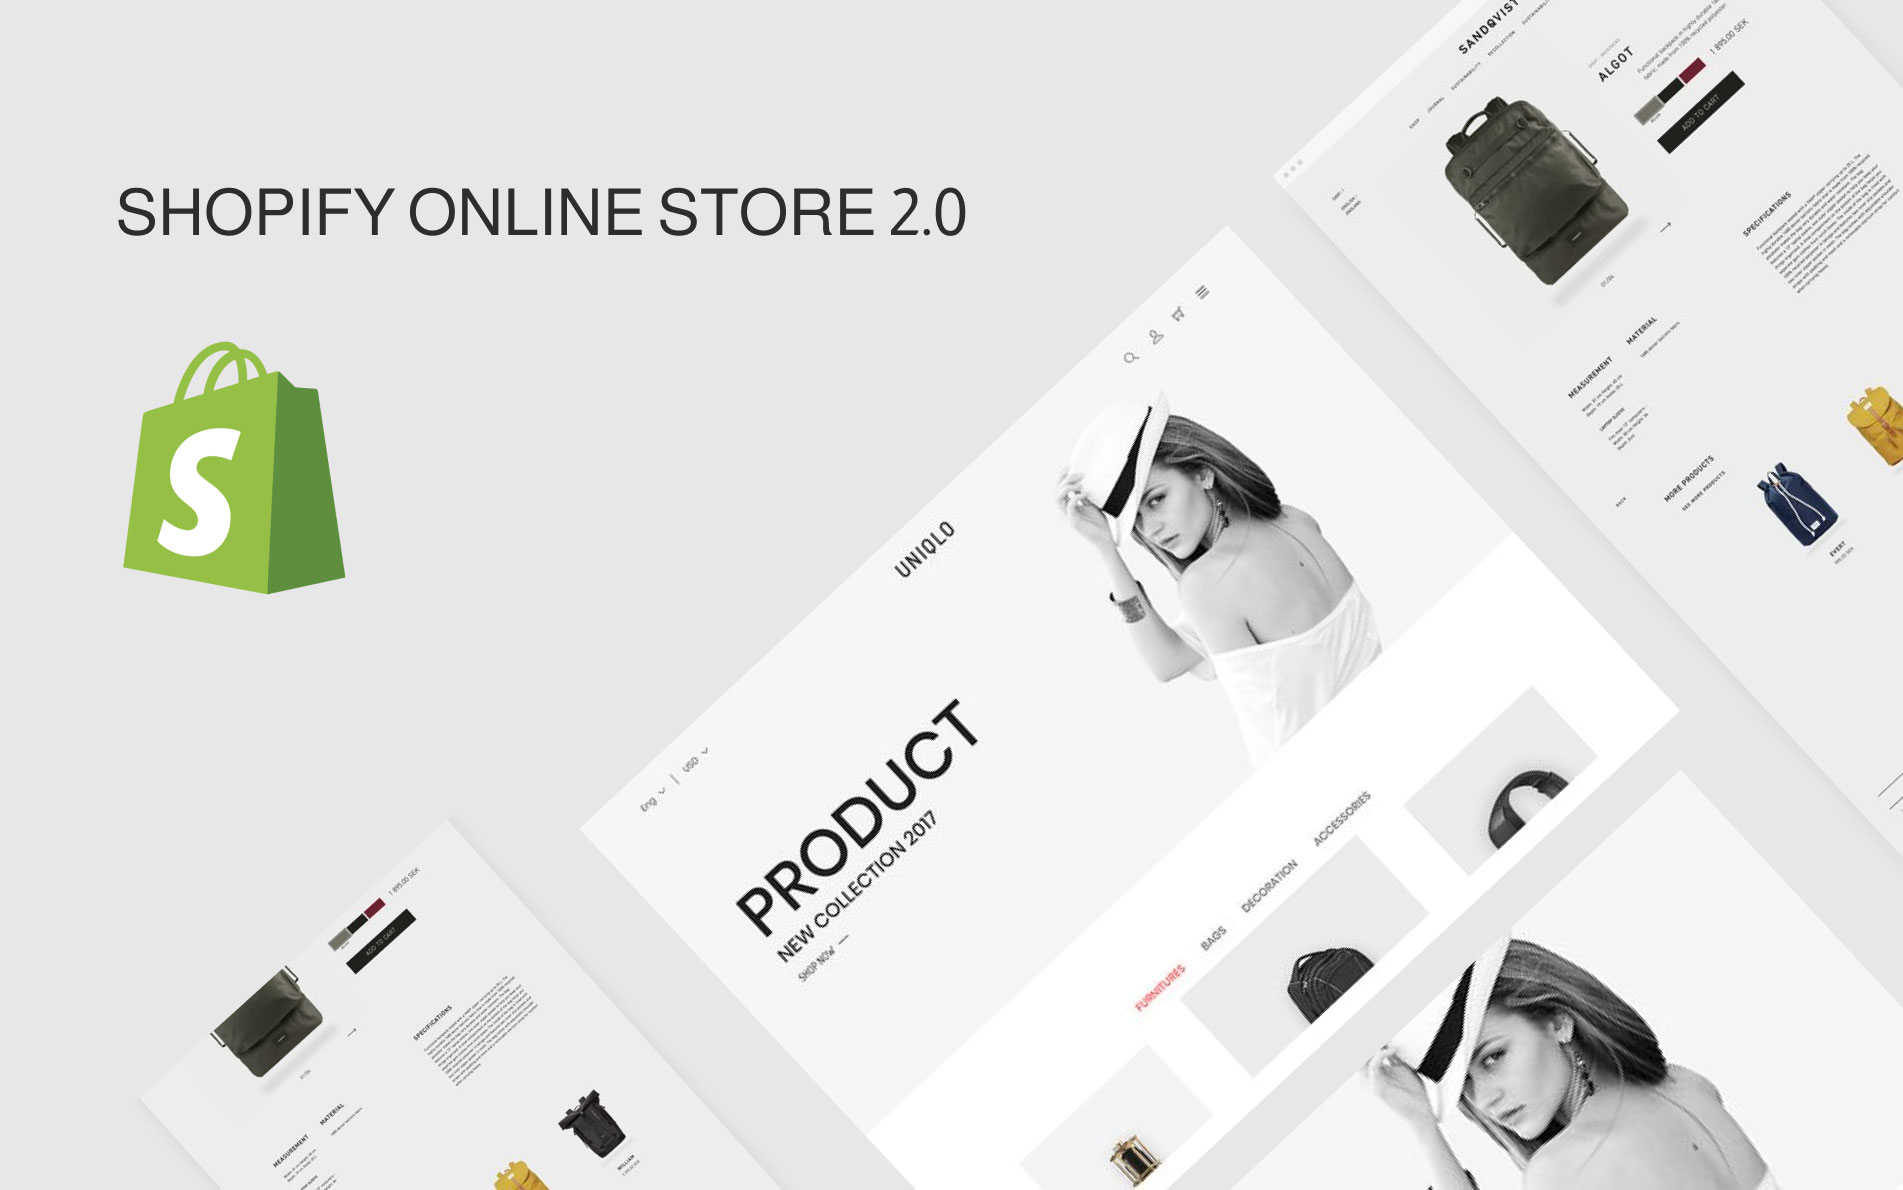 How does the Shopify Online Store 2.0 Revolution help merchants?